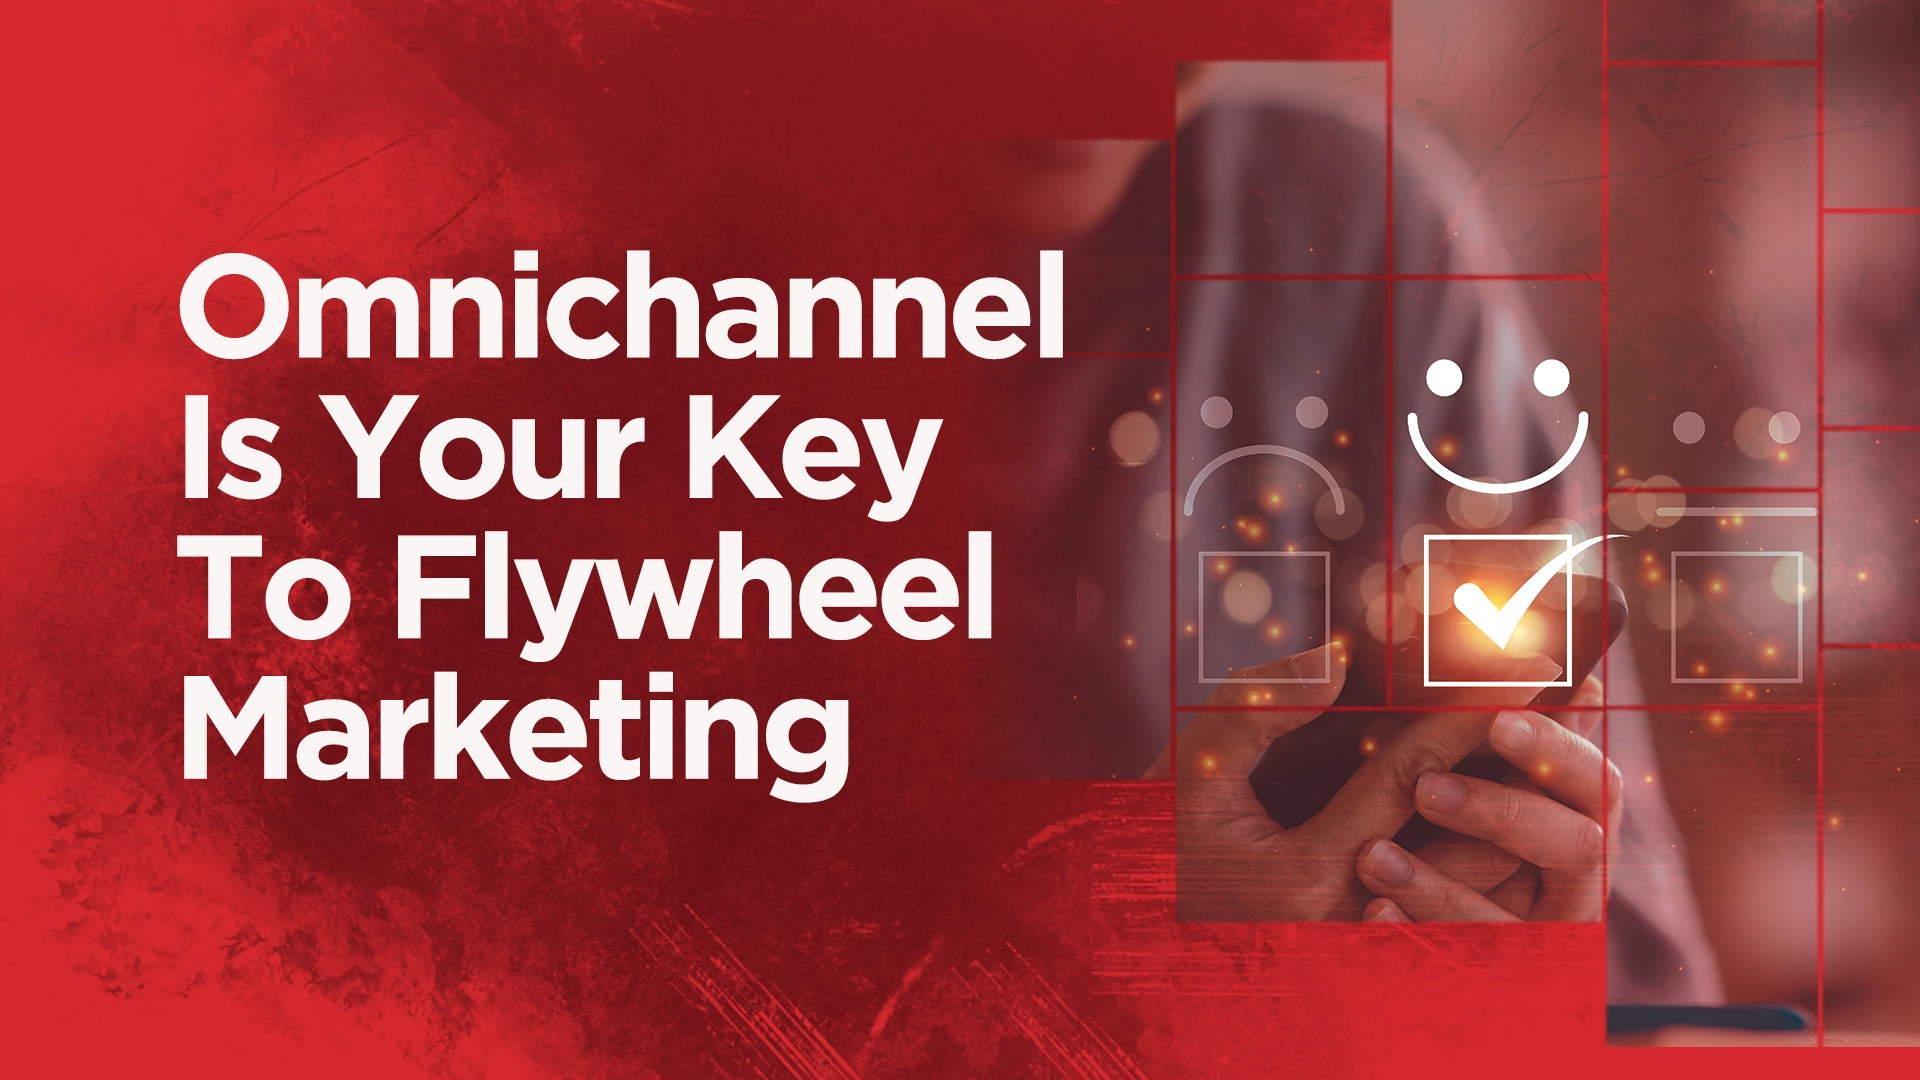 Why the omnichannel approach is your key to flywheel marketing